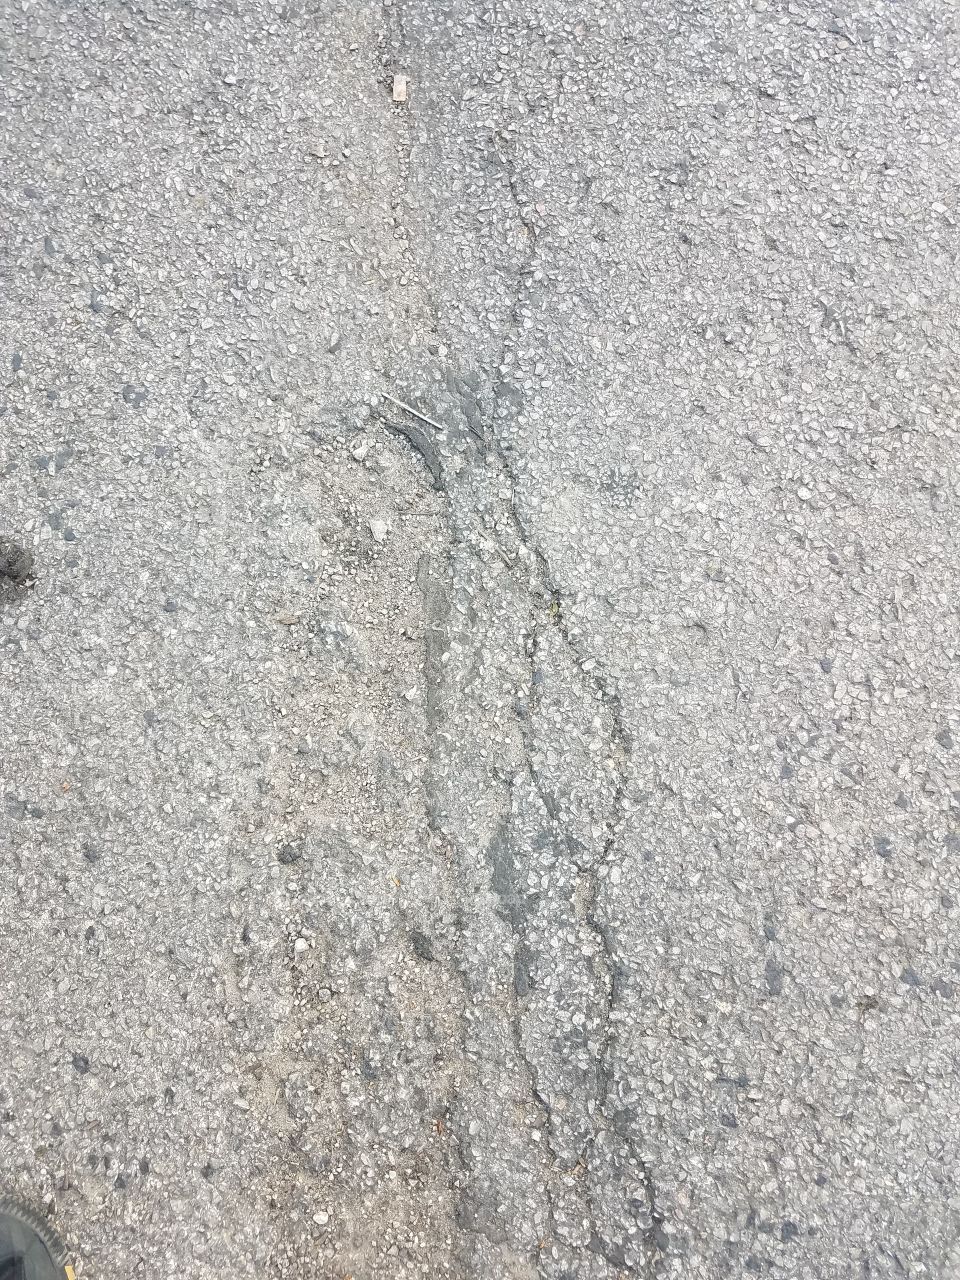 pavement from parking lot